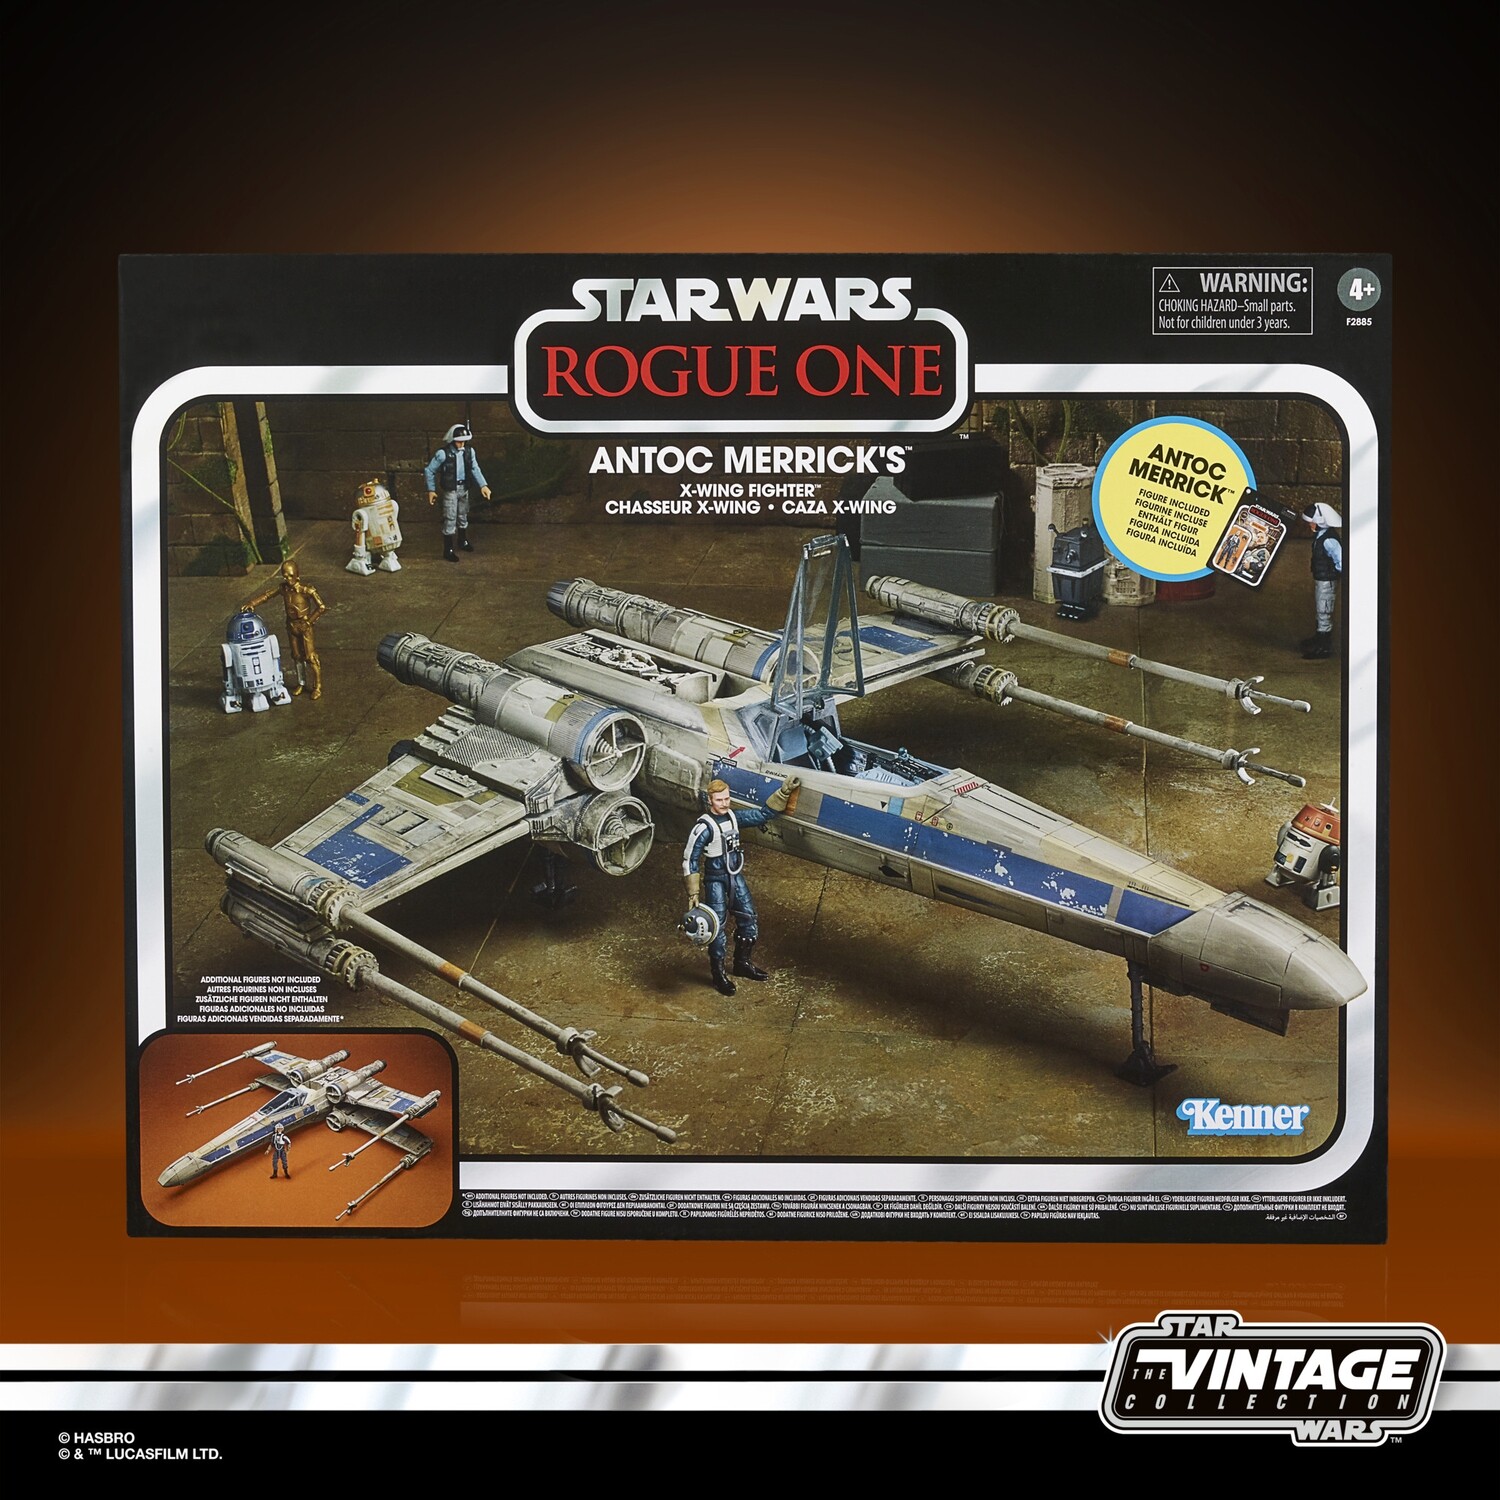 Pre-order: Star Wars The Vintage Collection Rogue One Xwing + Antoc Merrick figure [129,99]